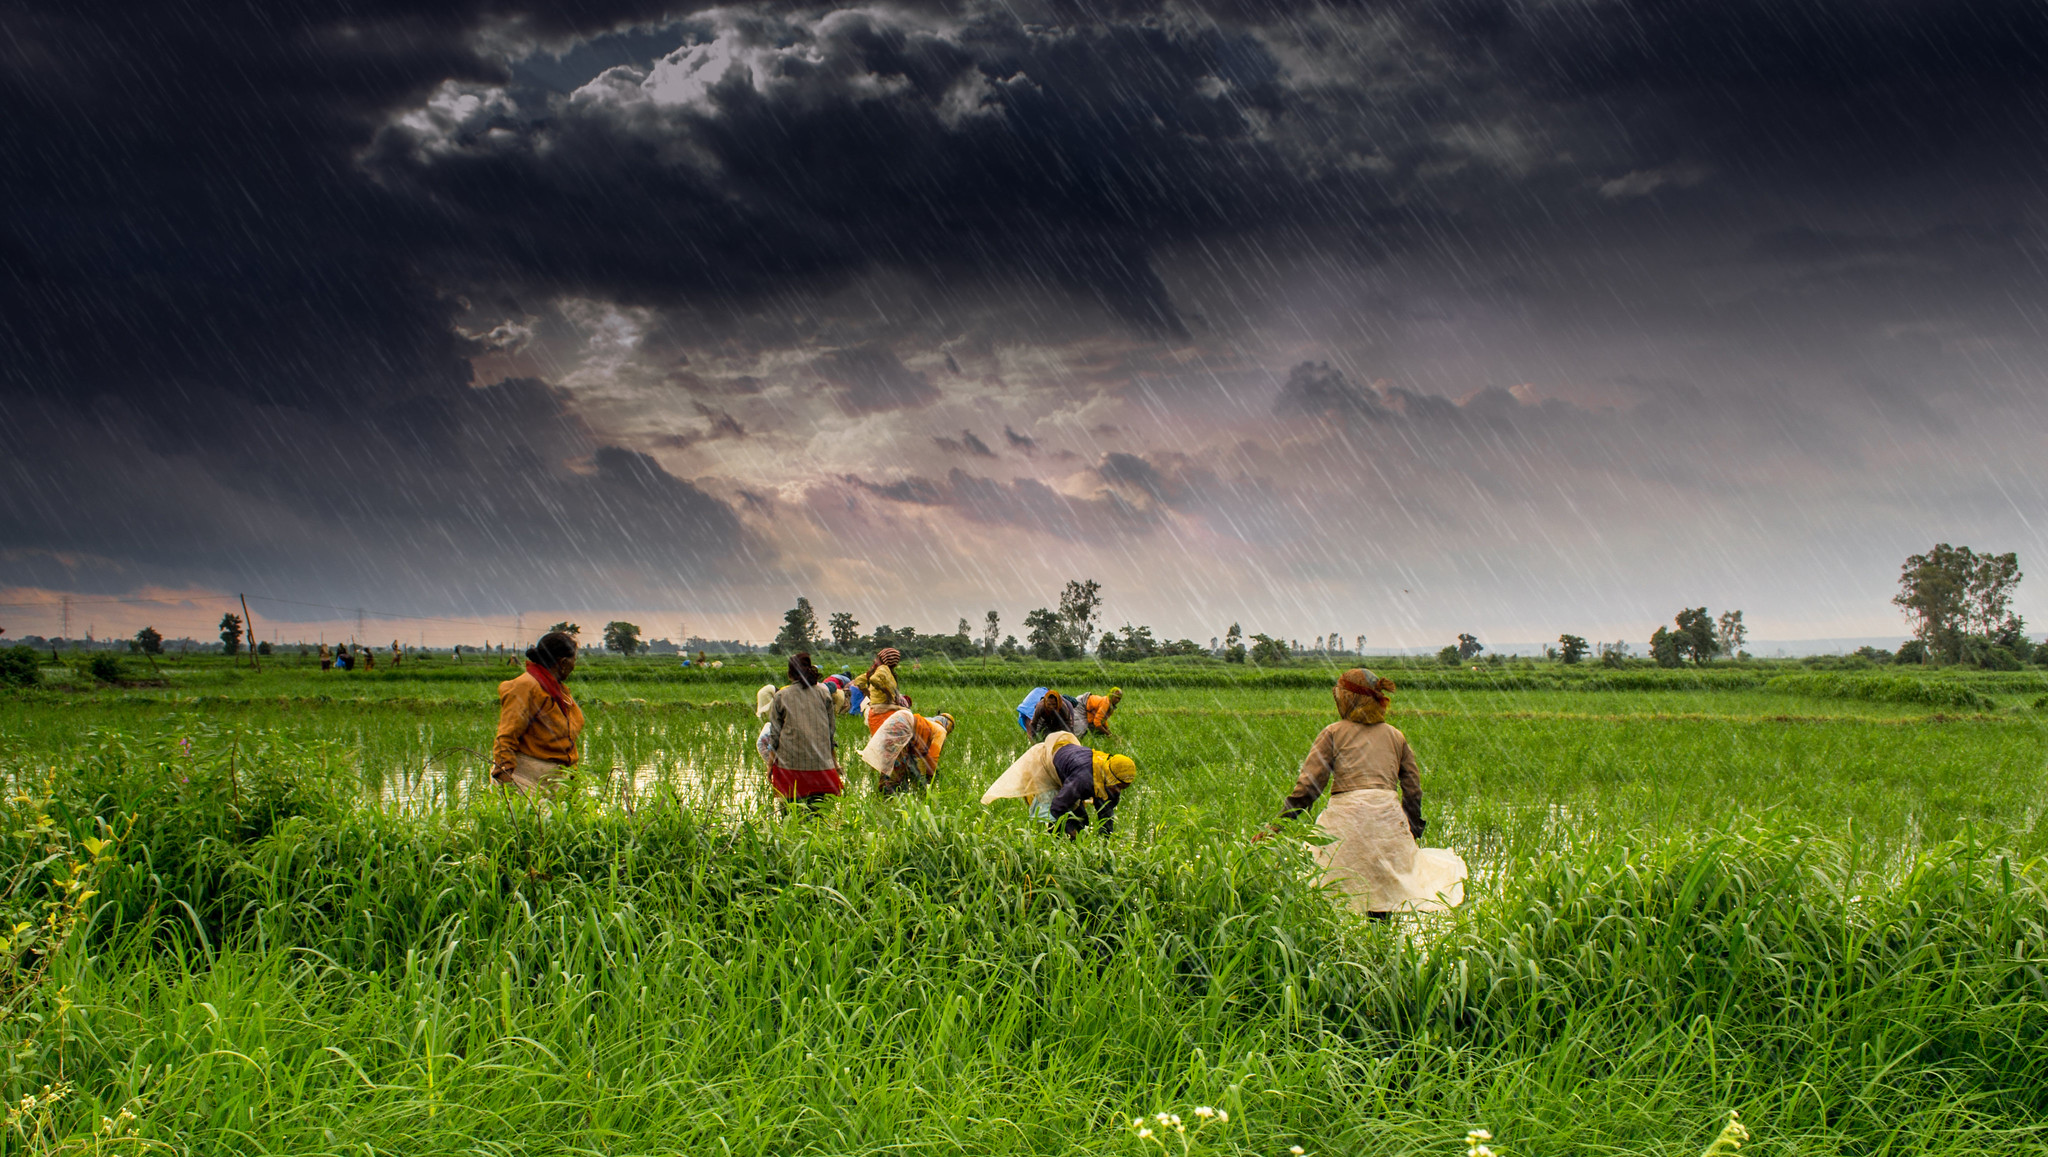 A farm in central India : Rajarshi Mitra CC BY 2.0 DEED